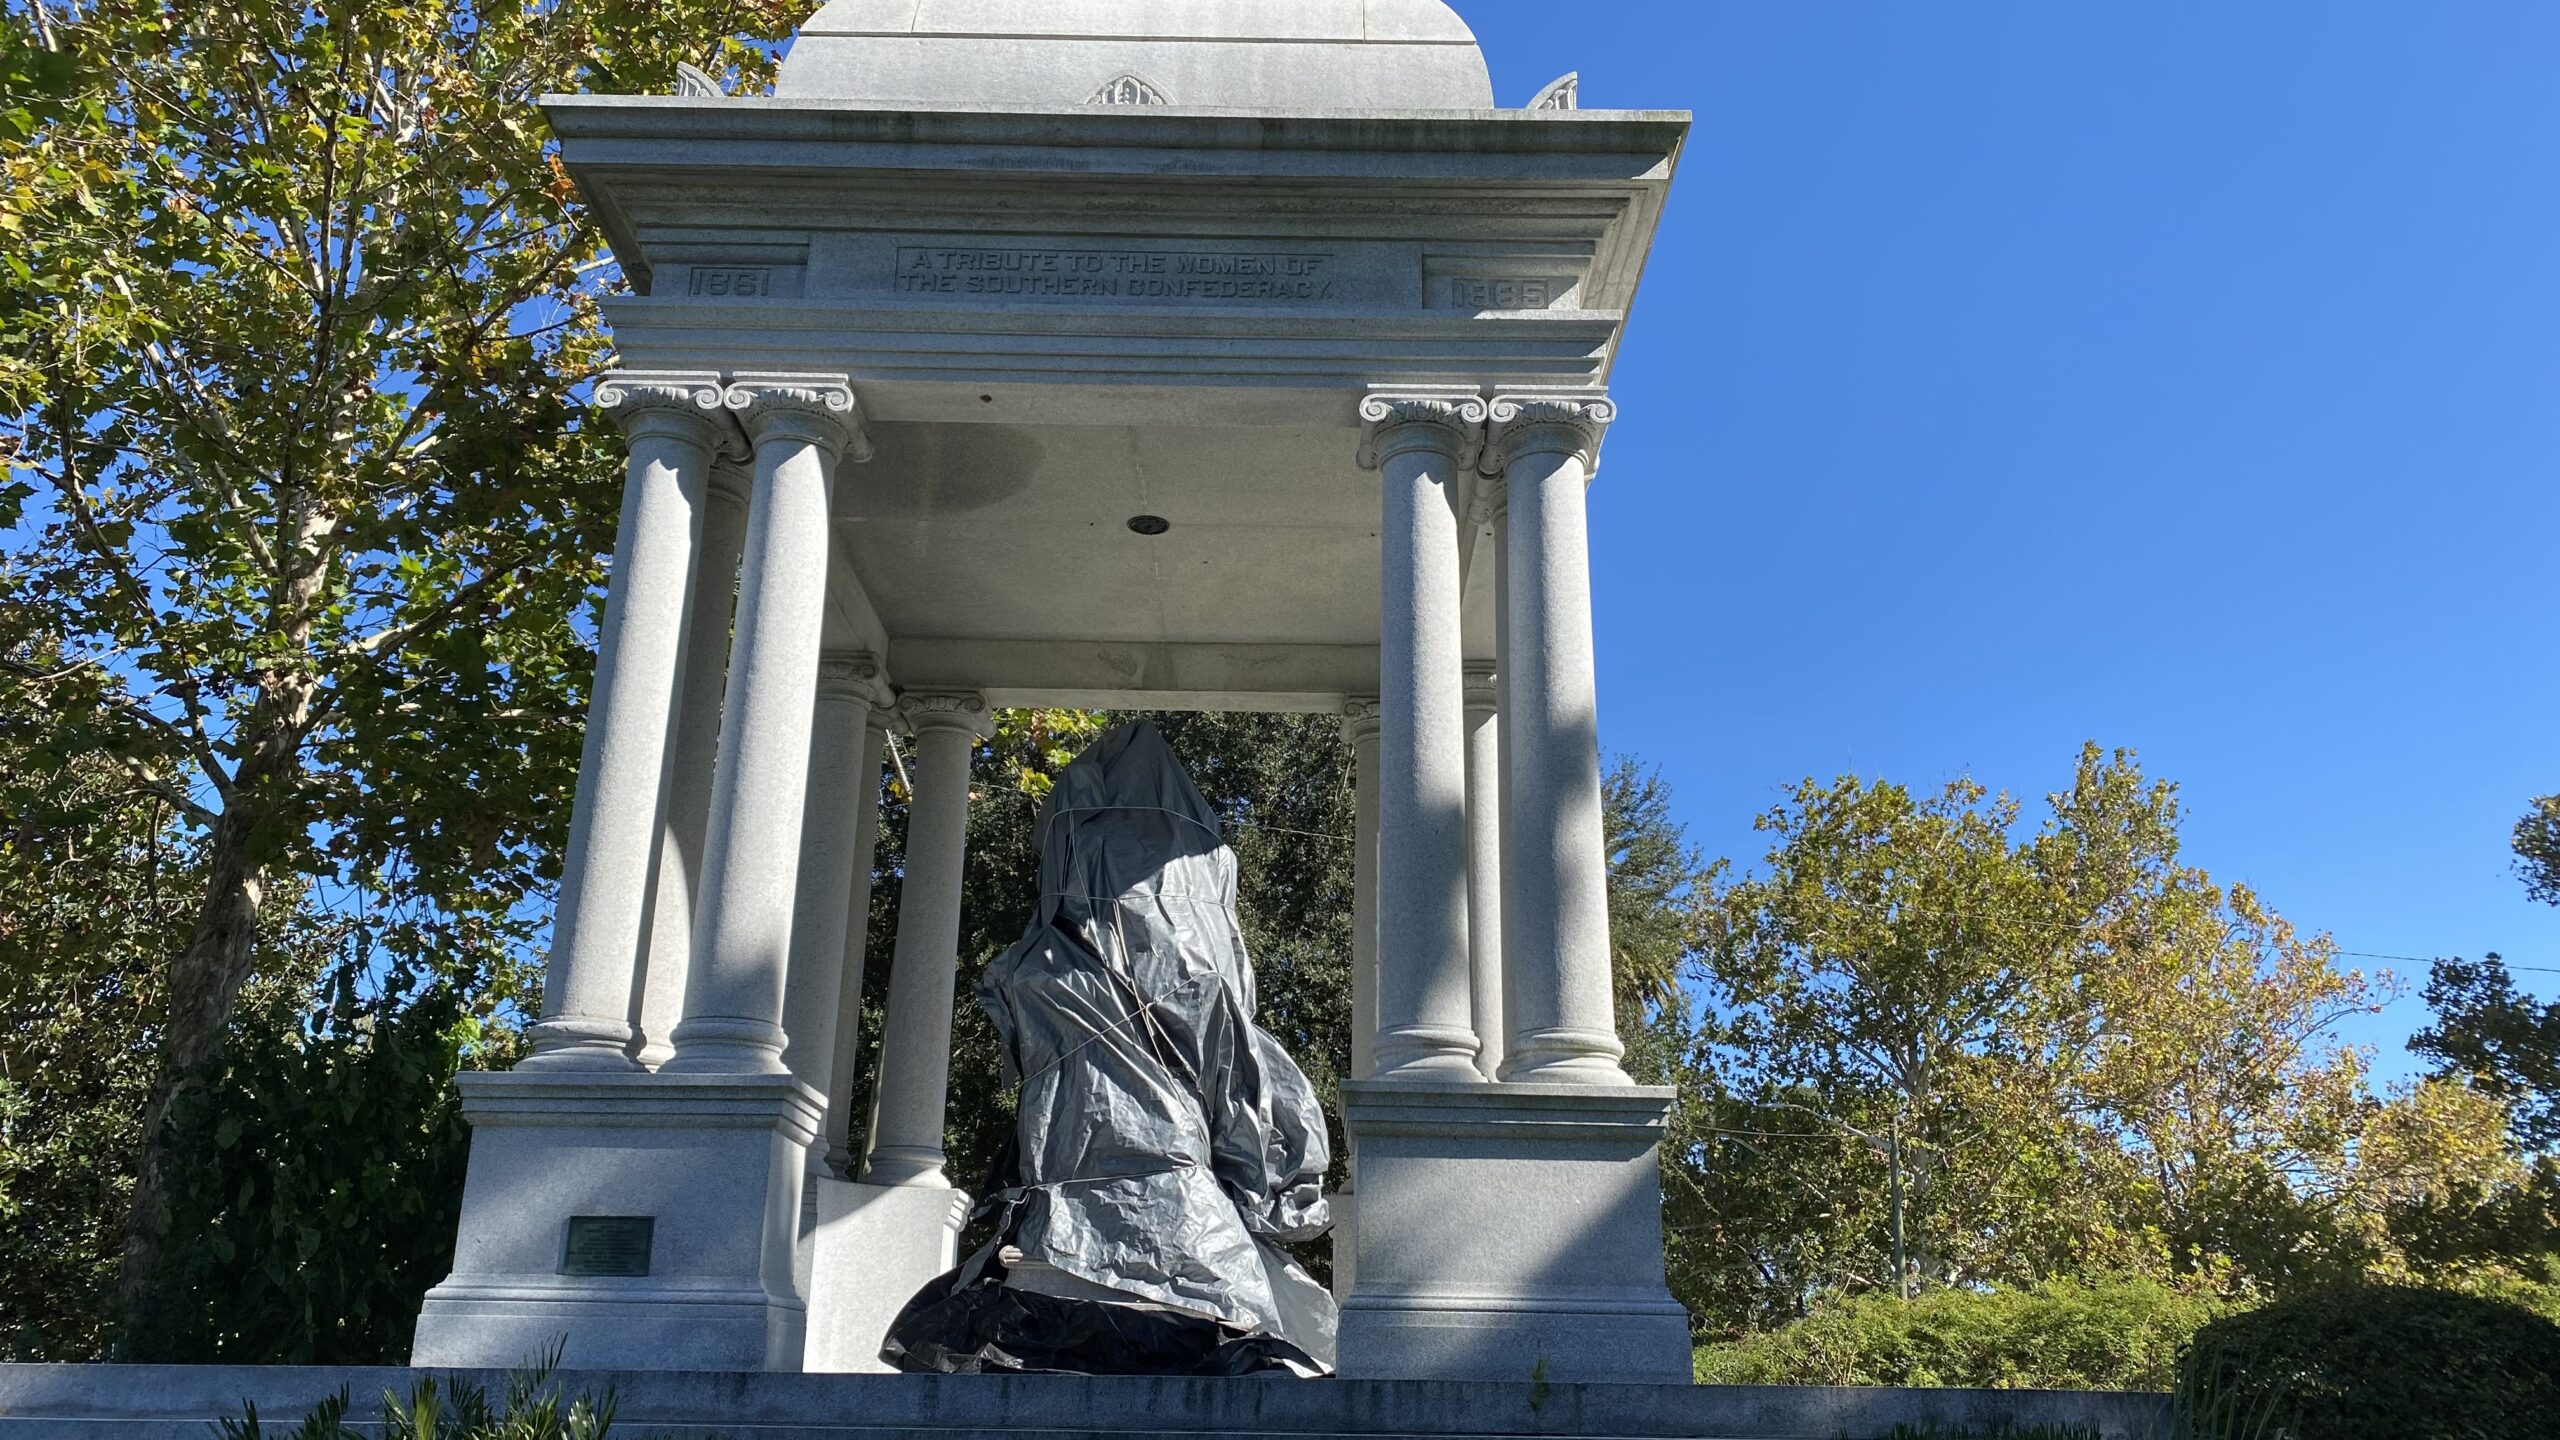 Springfield park monument covered in a tarp